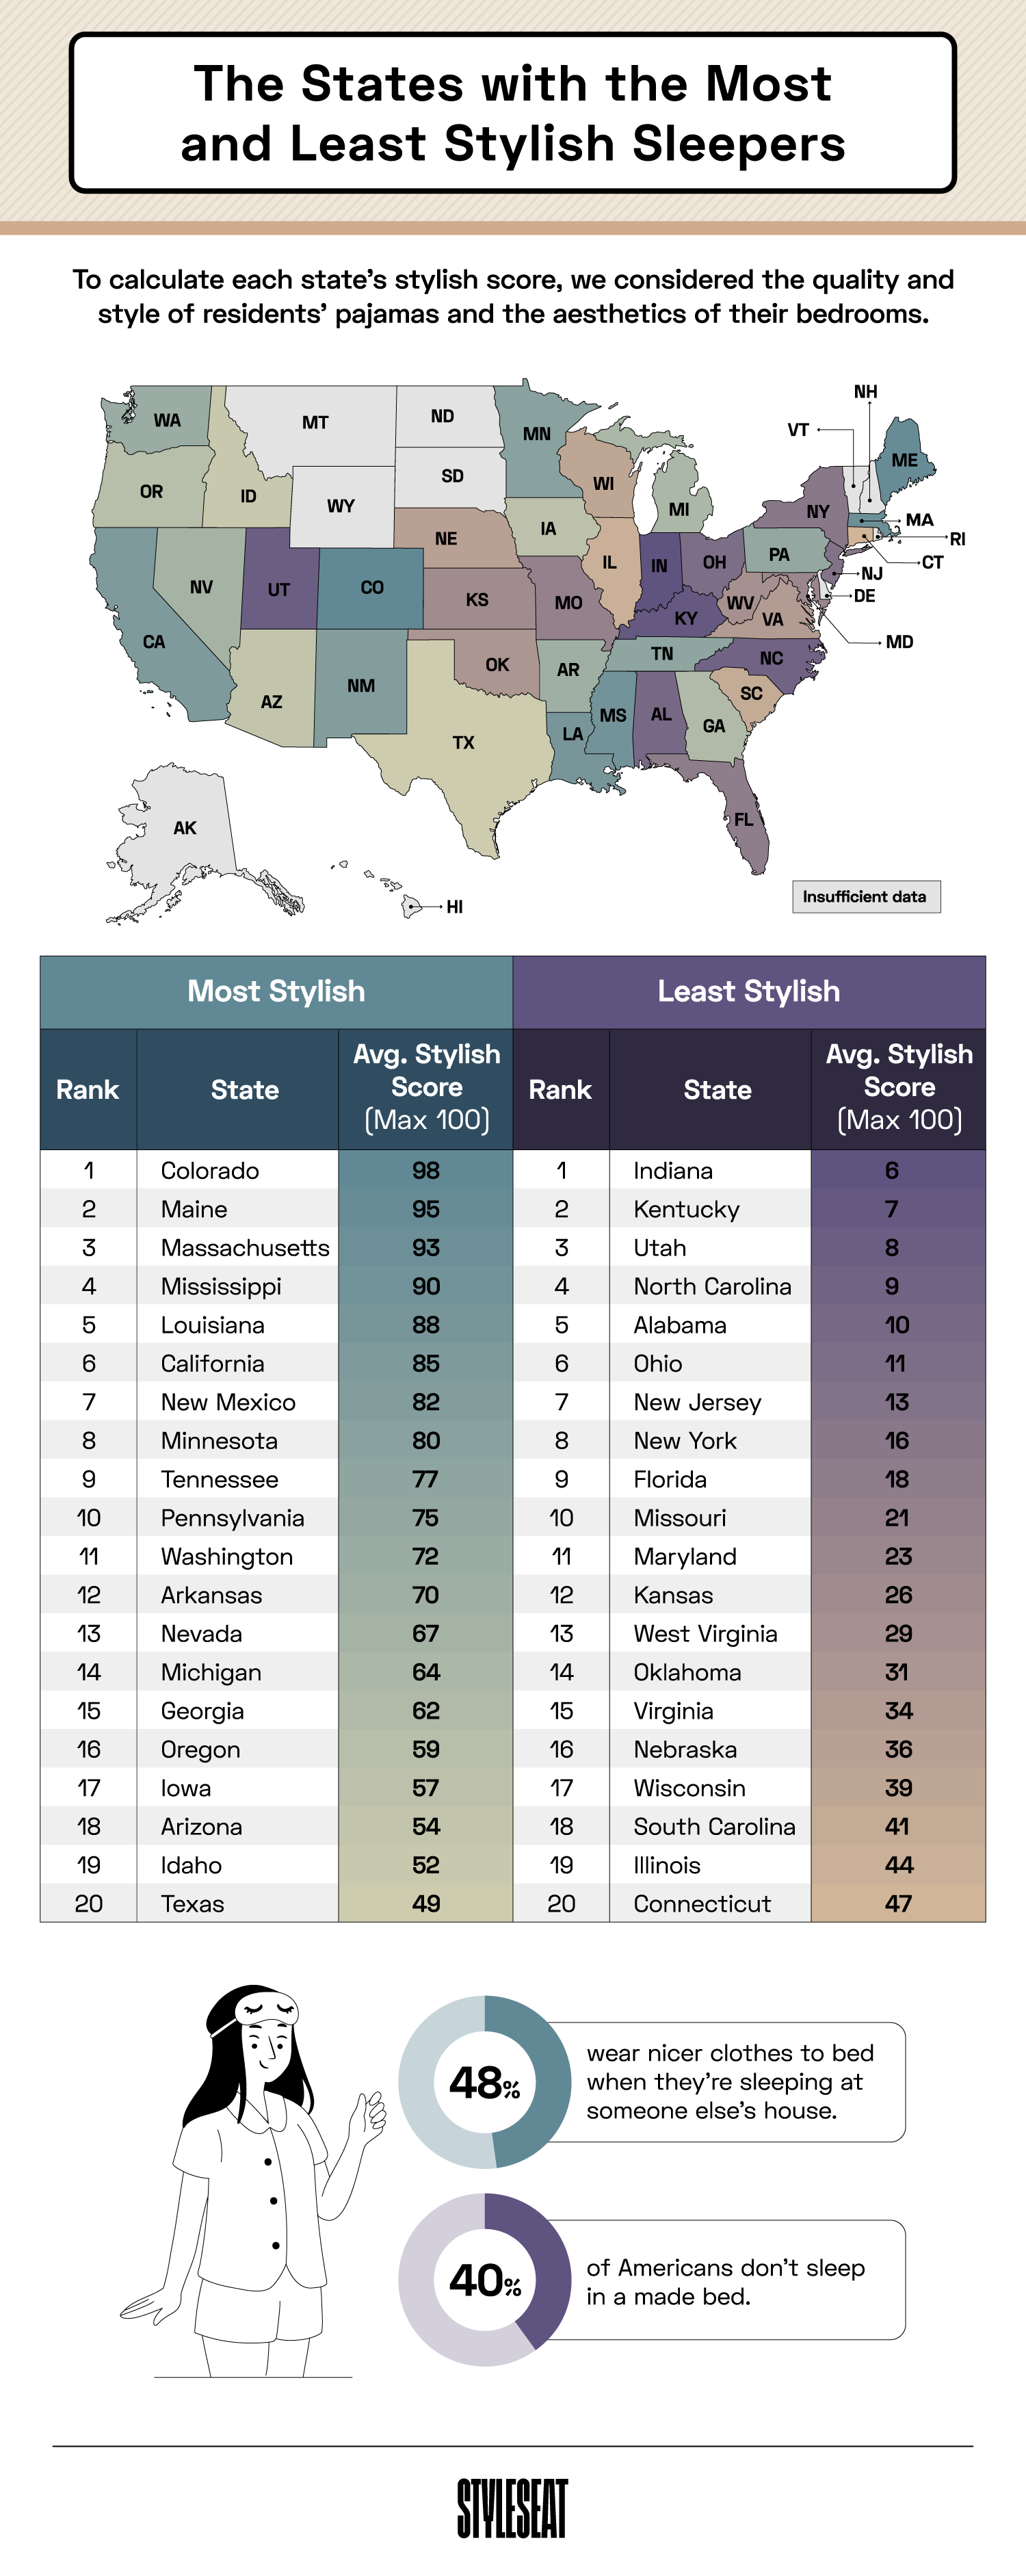 states with the most stylish sleepers ranked